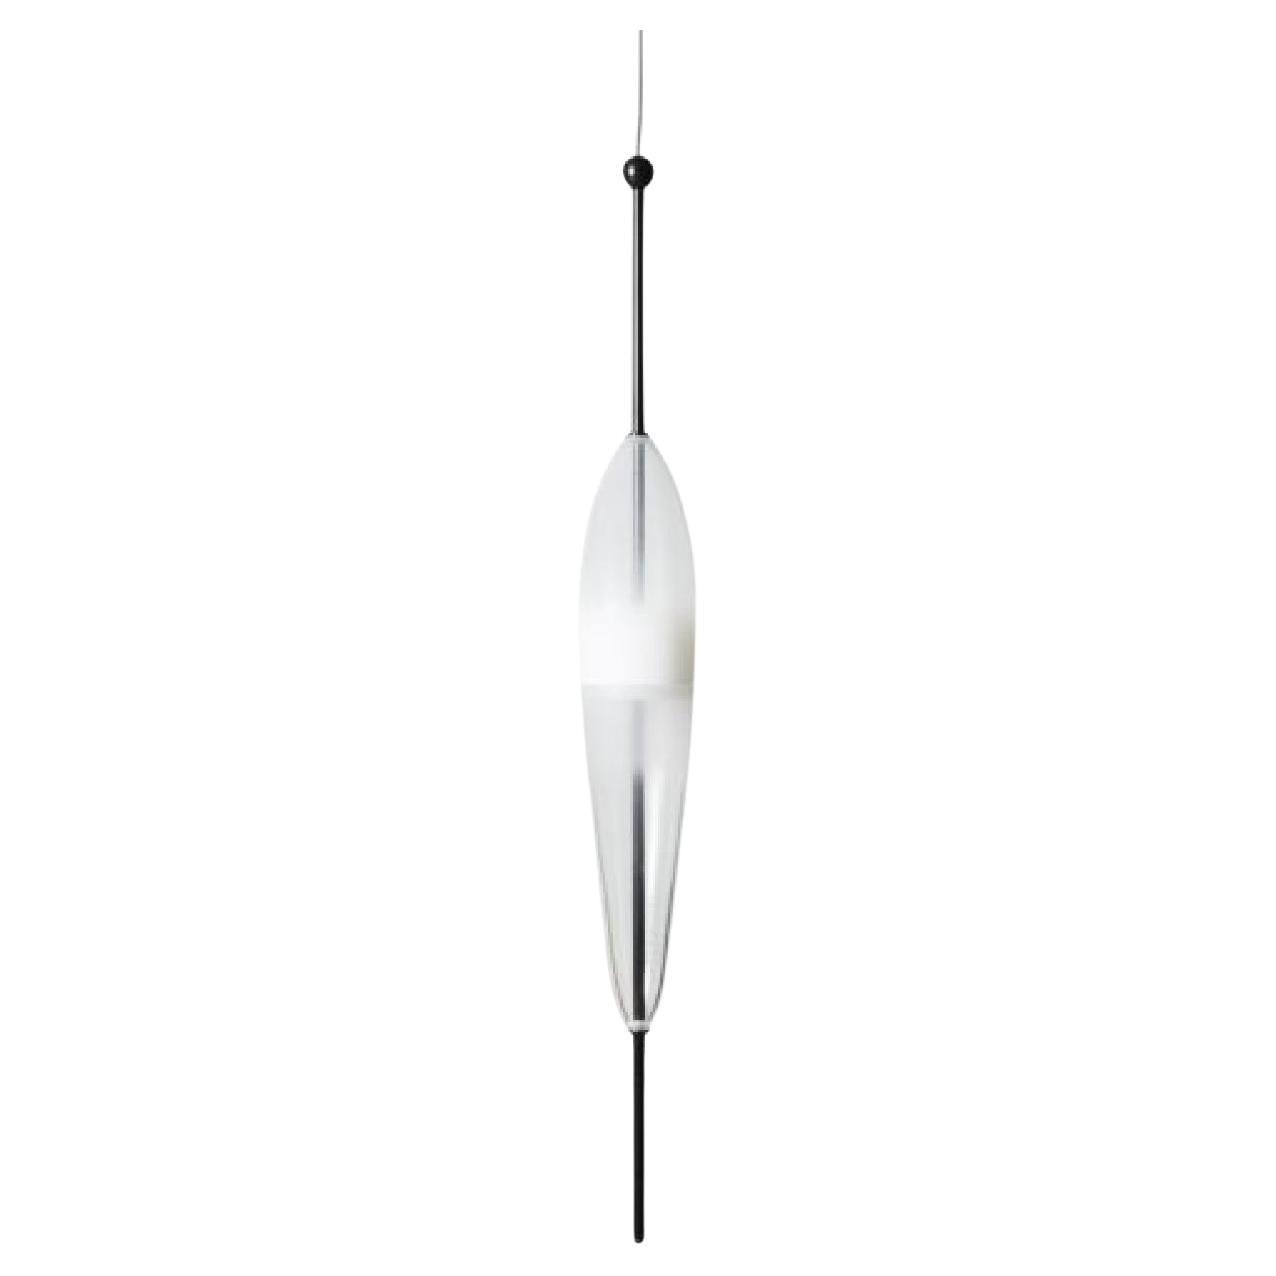 FLOW[T] S2 Pendant lamp in White by Nao Tamura for Wonderglass For Sale